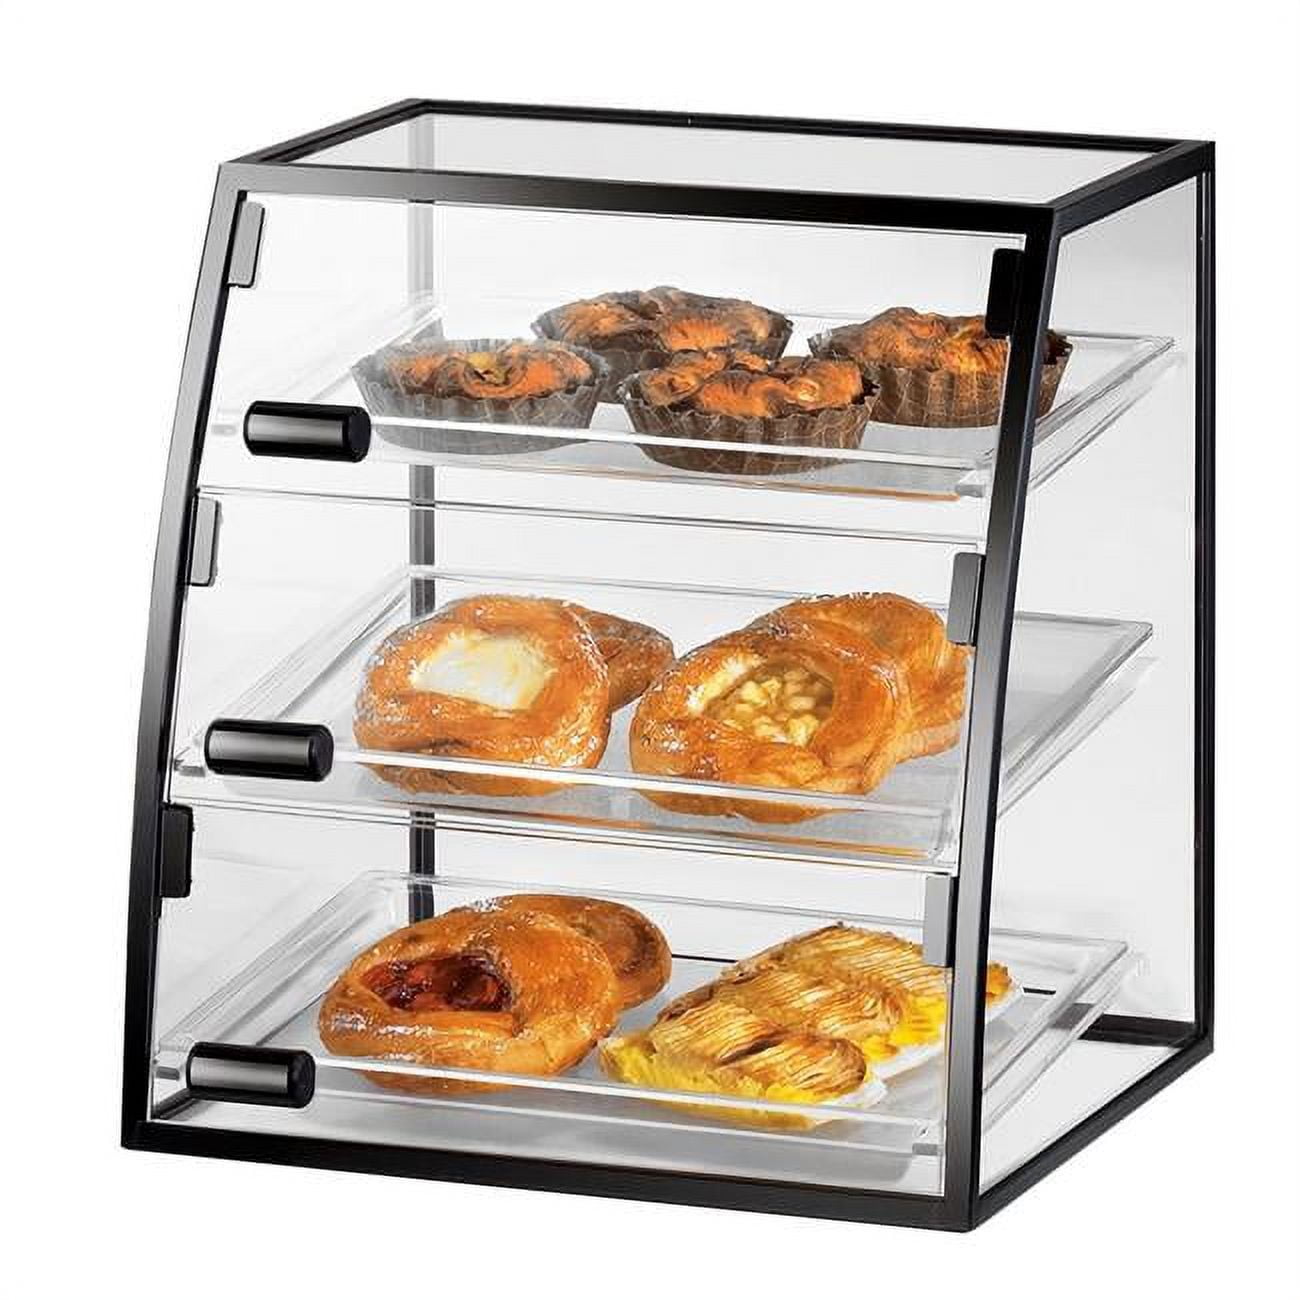 1708-1318 Iron Curved Self-service Display Case - 18 X 16 X 21 In.